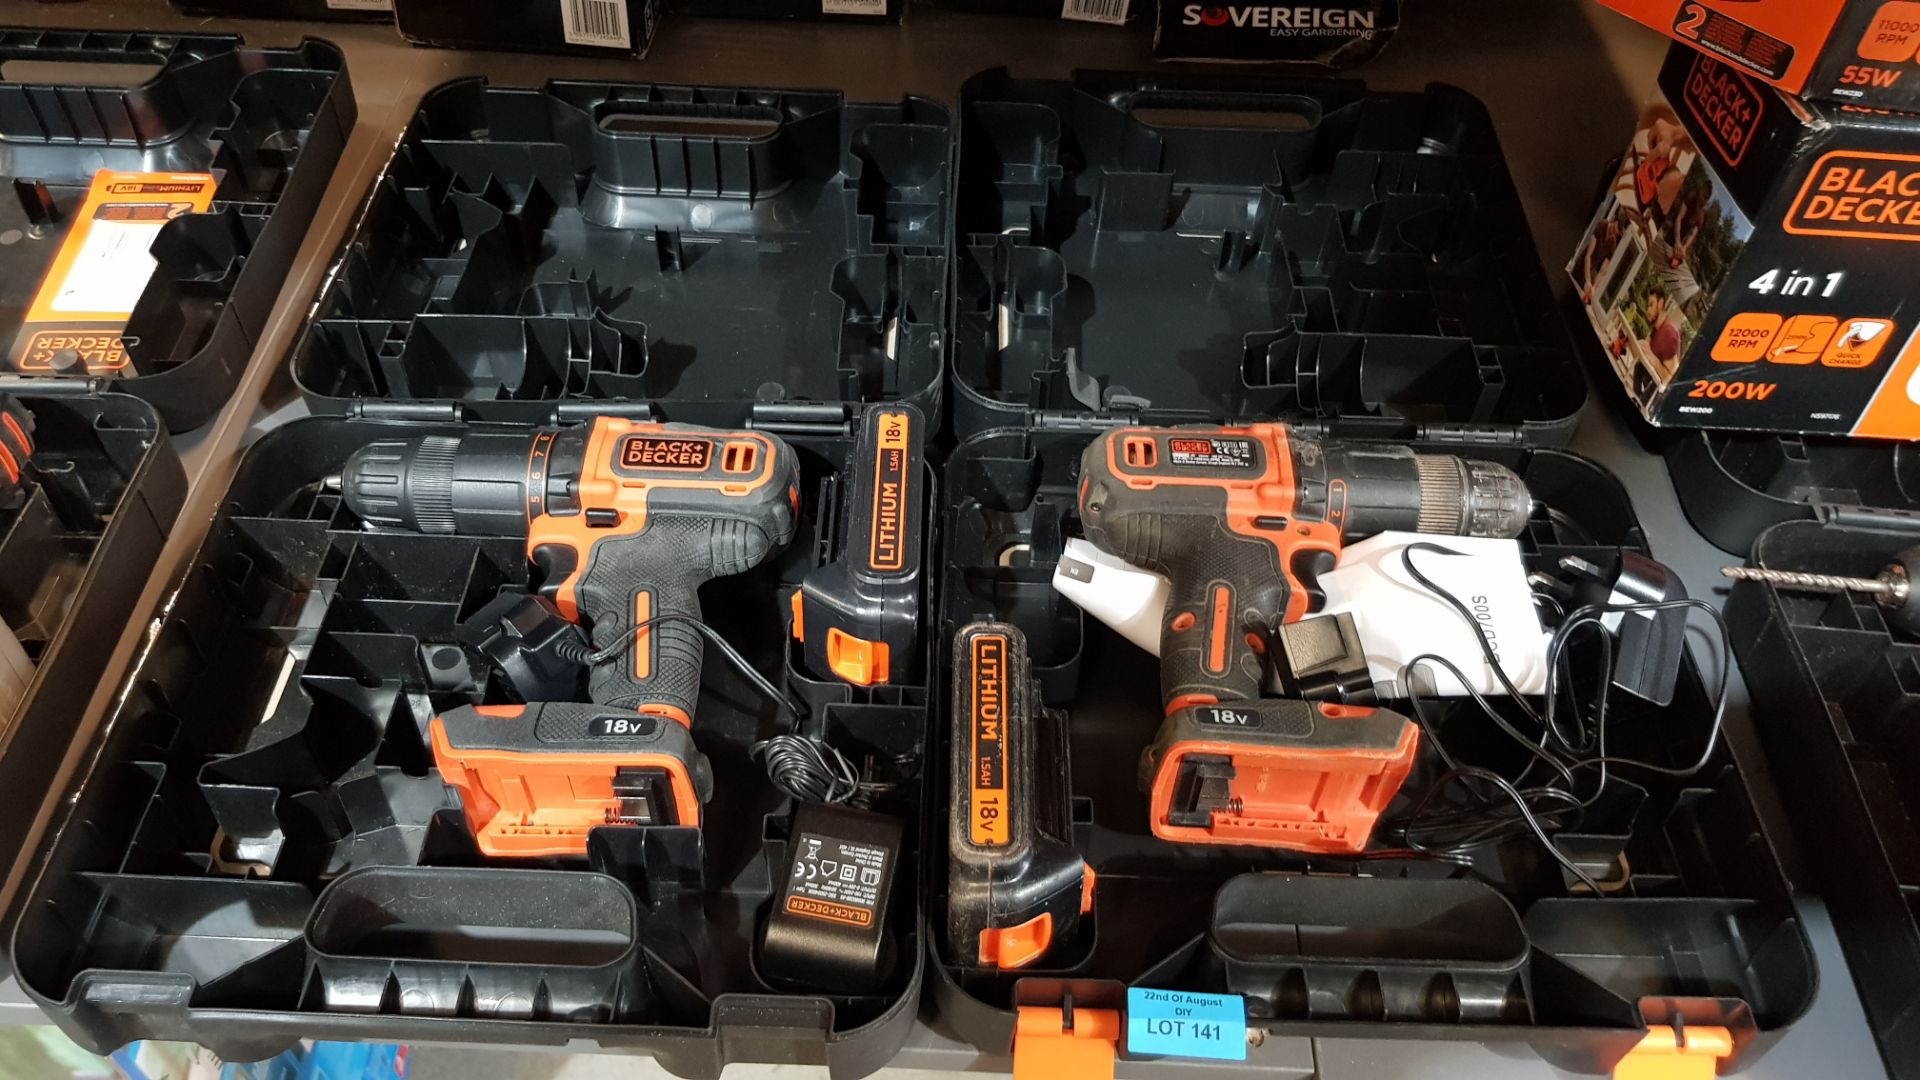 (R15B) 2x Black & Decker 18V 2 Gear Hammer Drill With Carry Case. Both Units Have Battery & Charger - Image 3 of 3